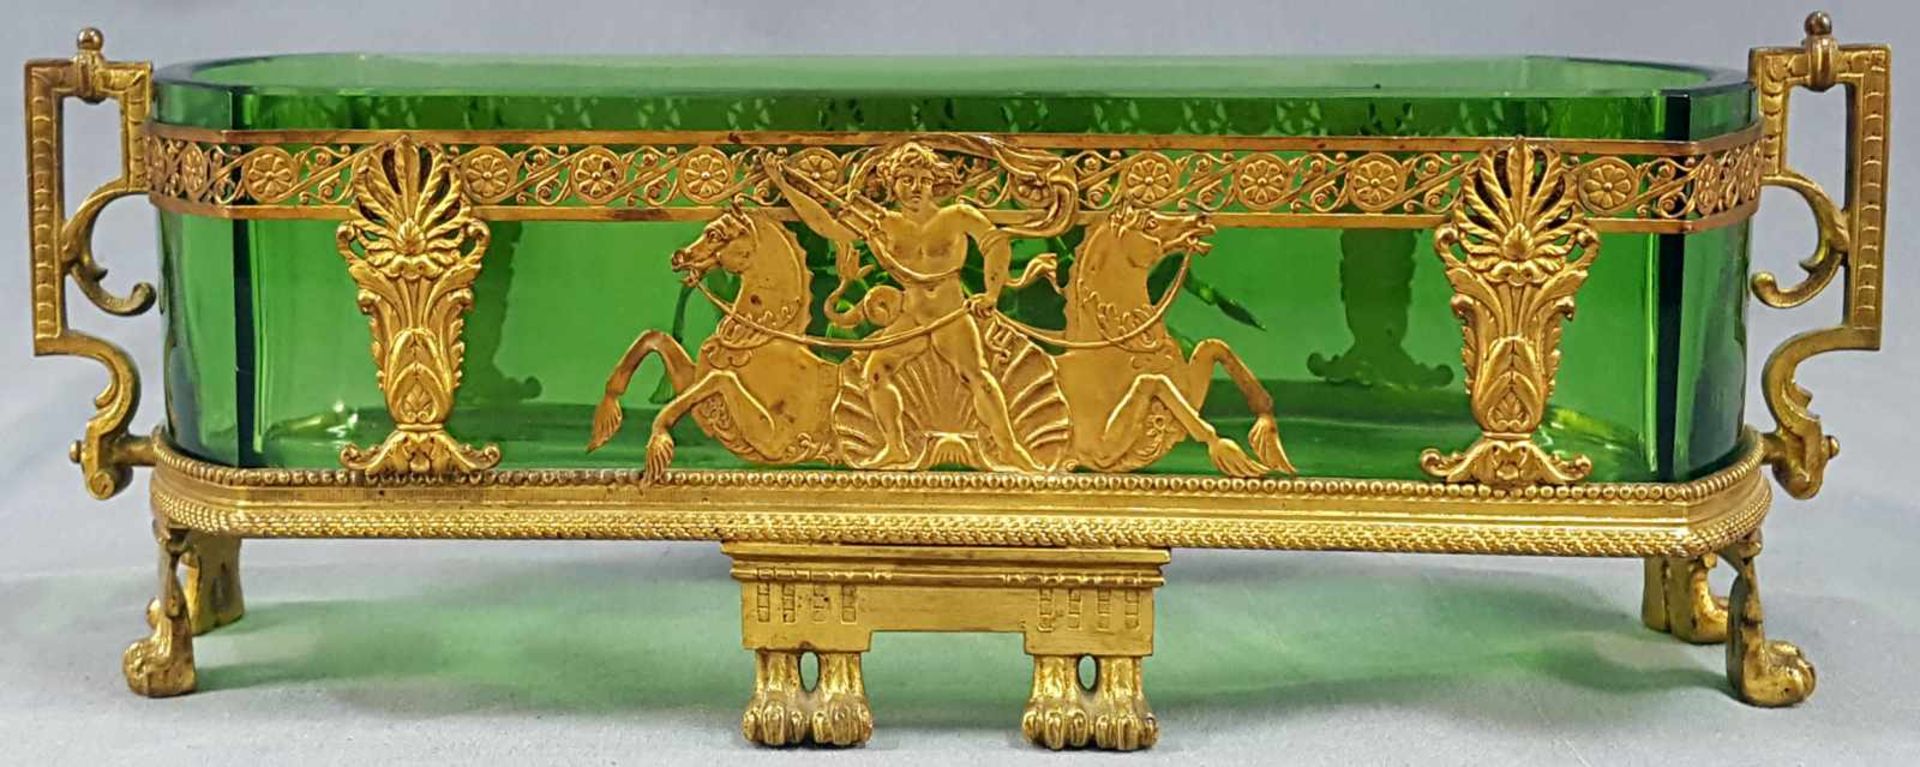 Jardinière, France, probably Empire Period. Fire gilded.<